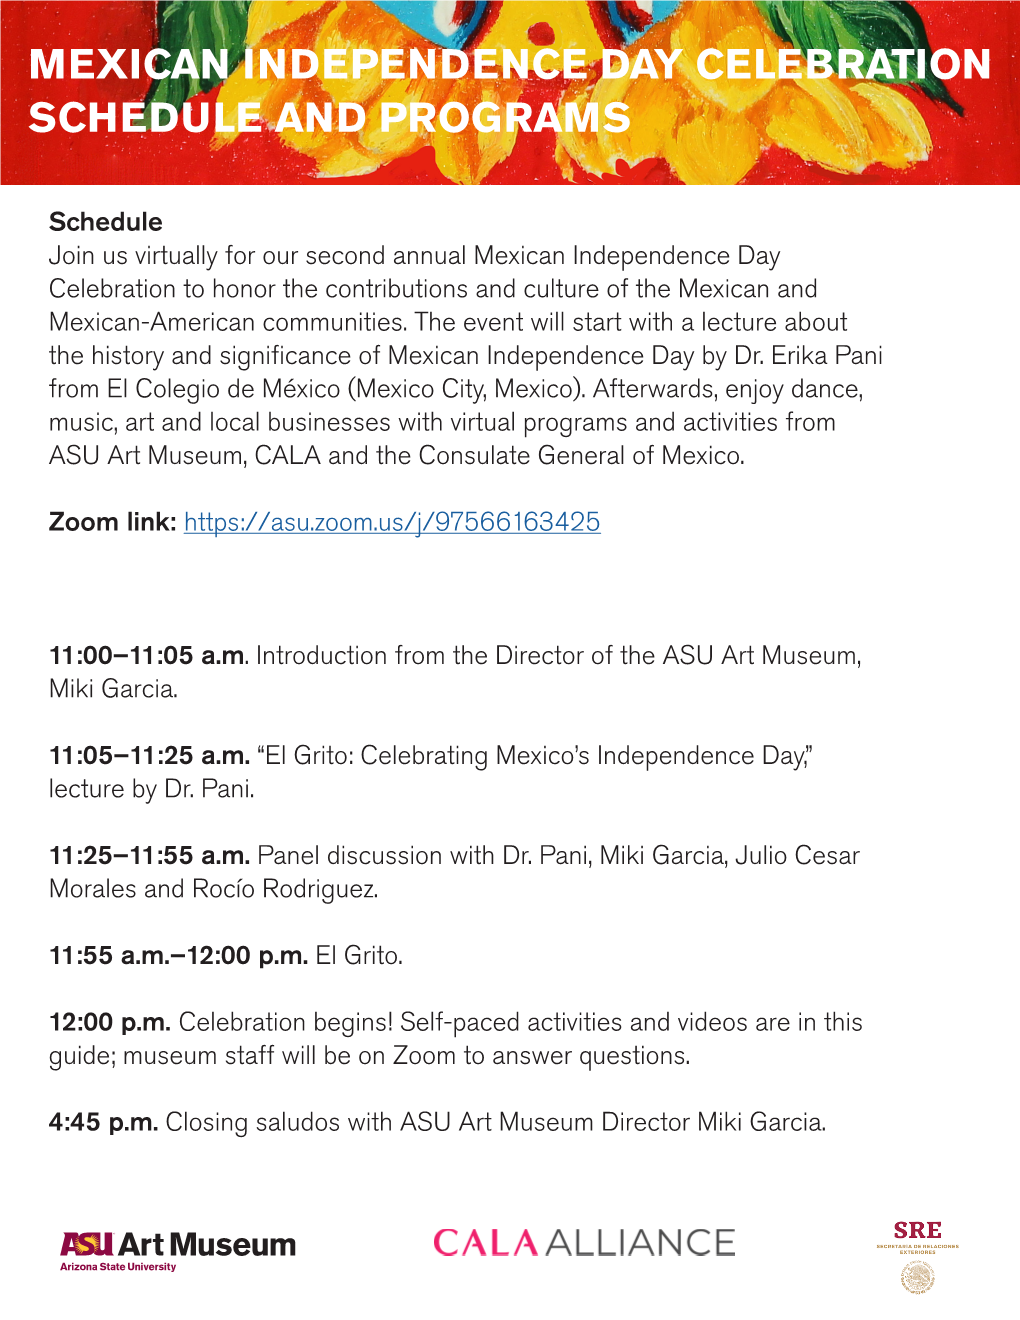 Mexican Independence Day Celebration Schedule and Programs